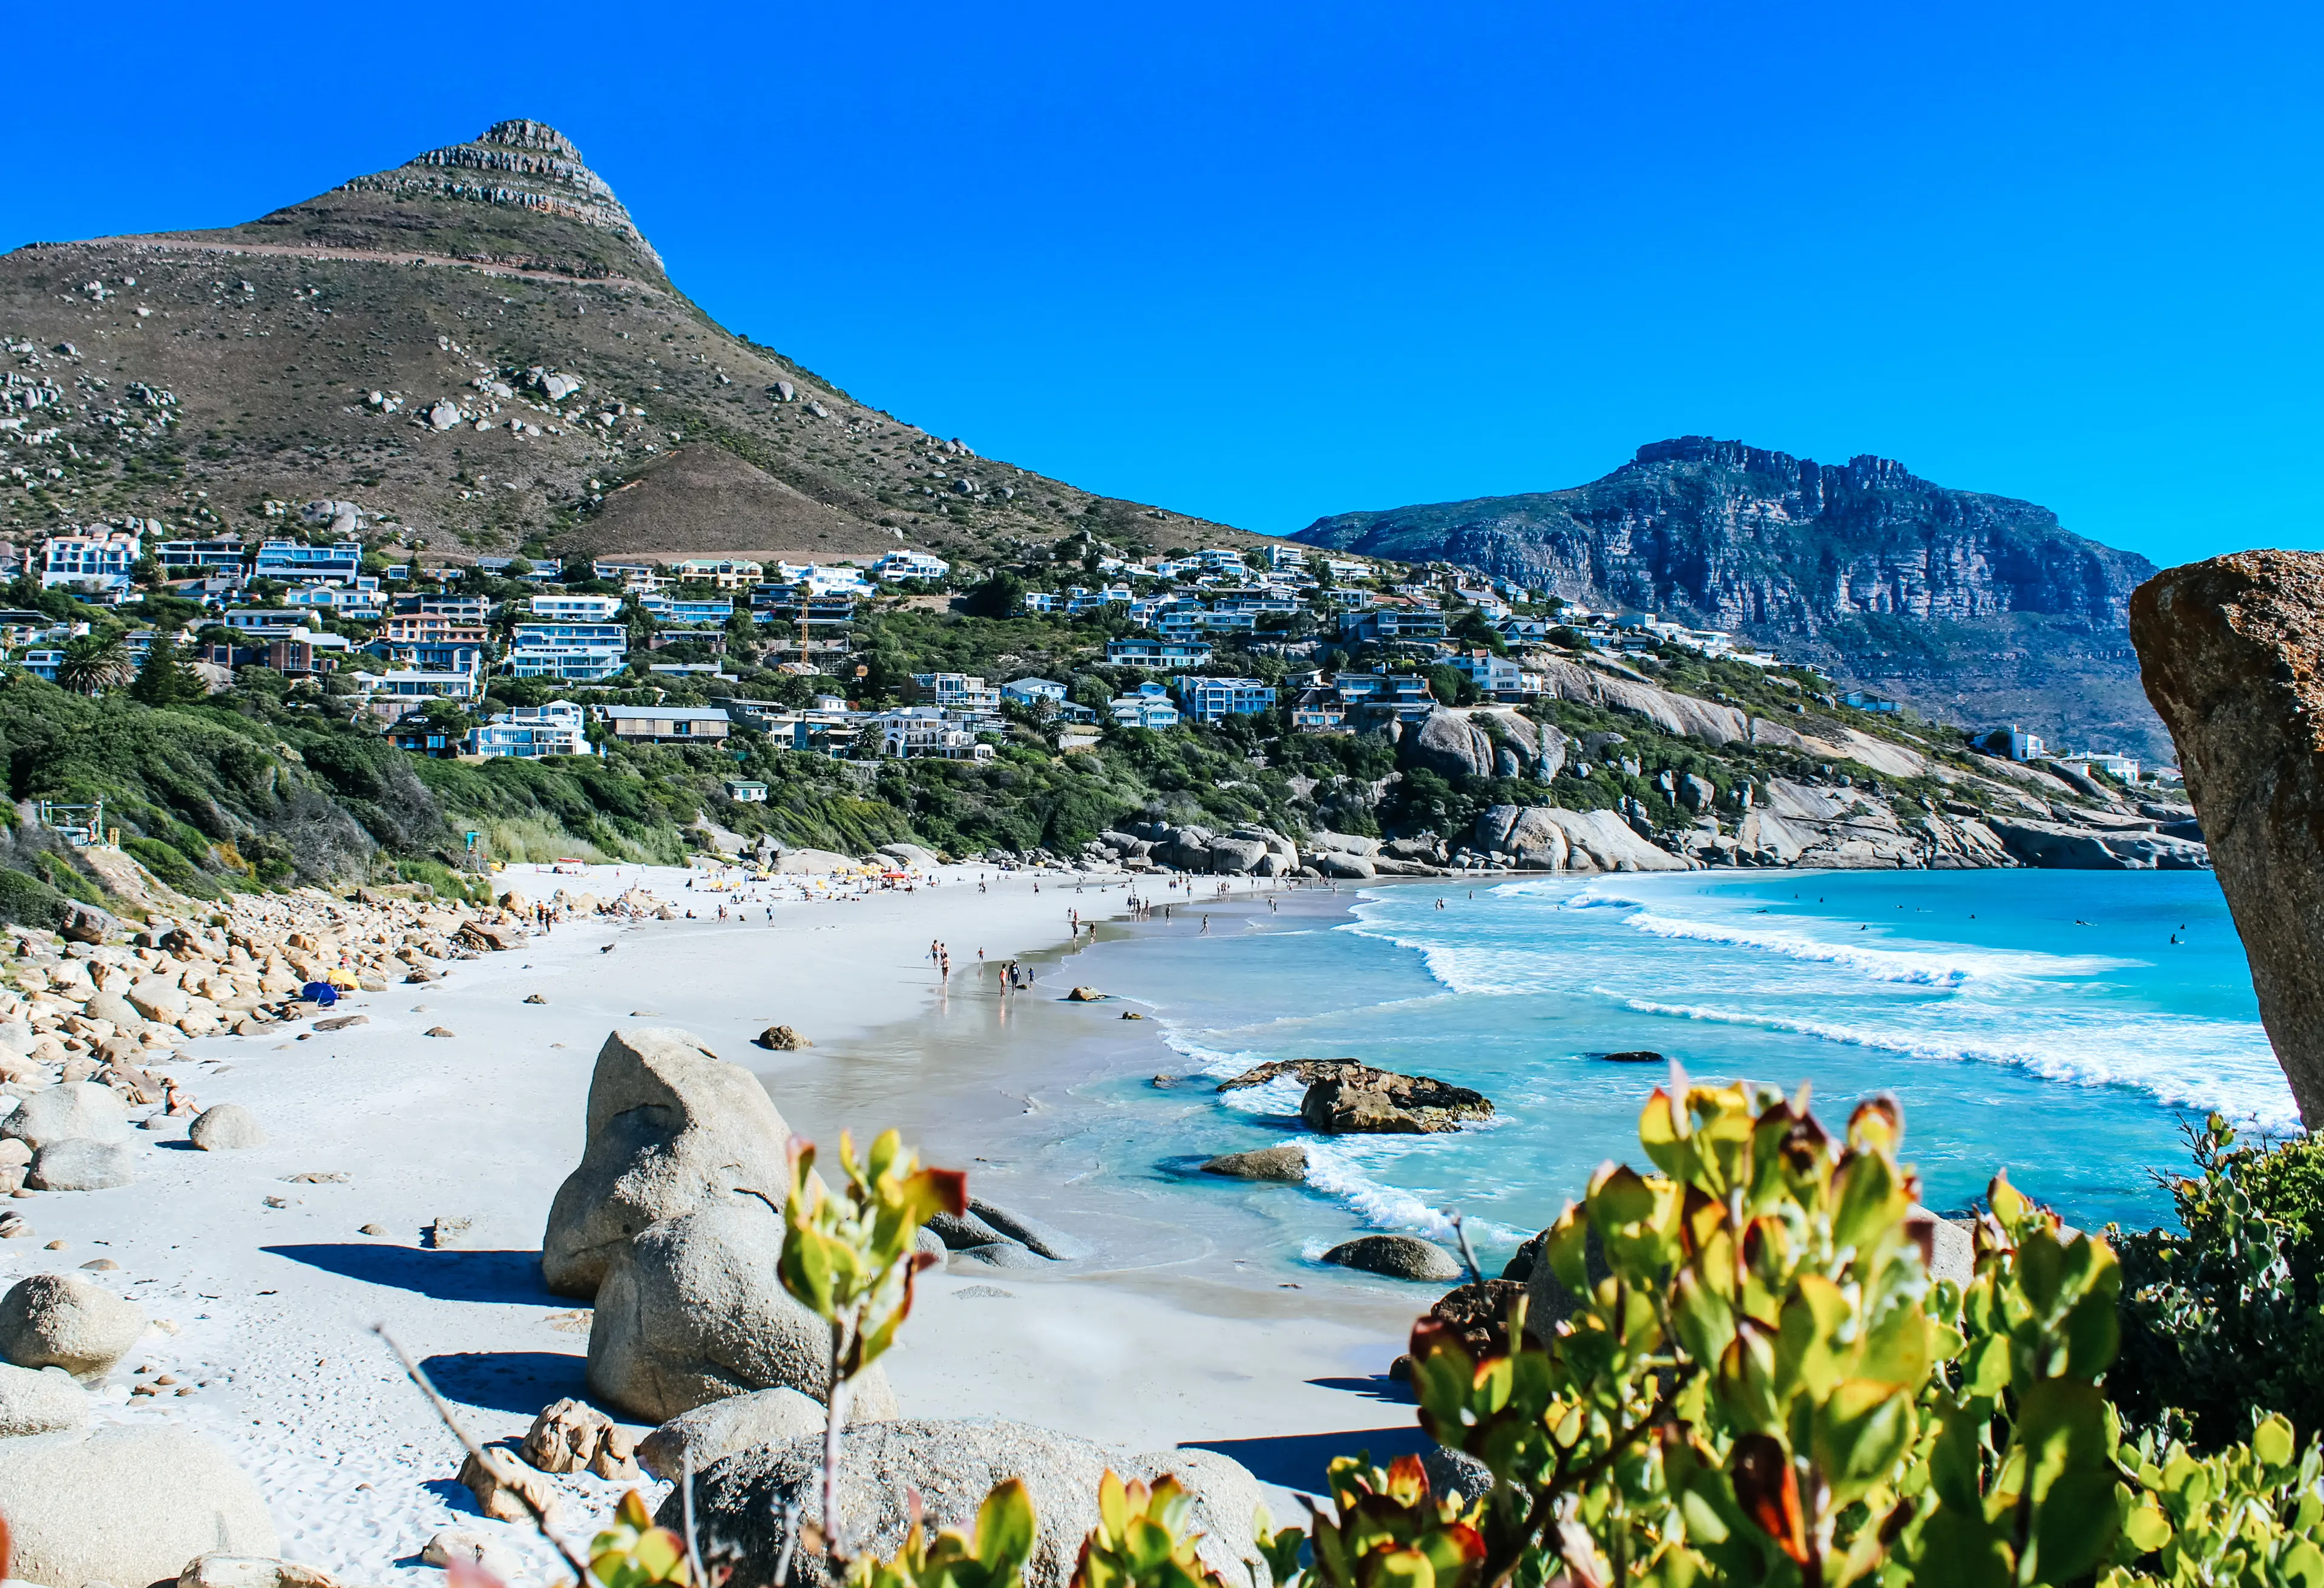 3-Day Local Family Adventure: Sightseeing & Relaxation in Cape Town